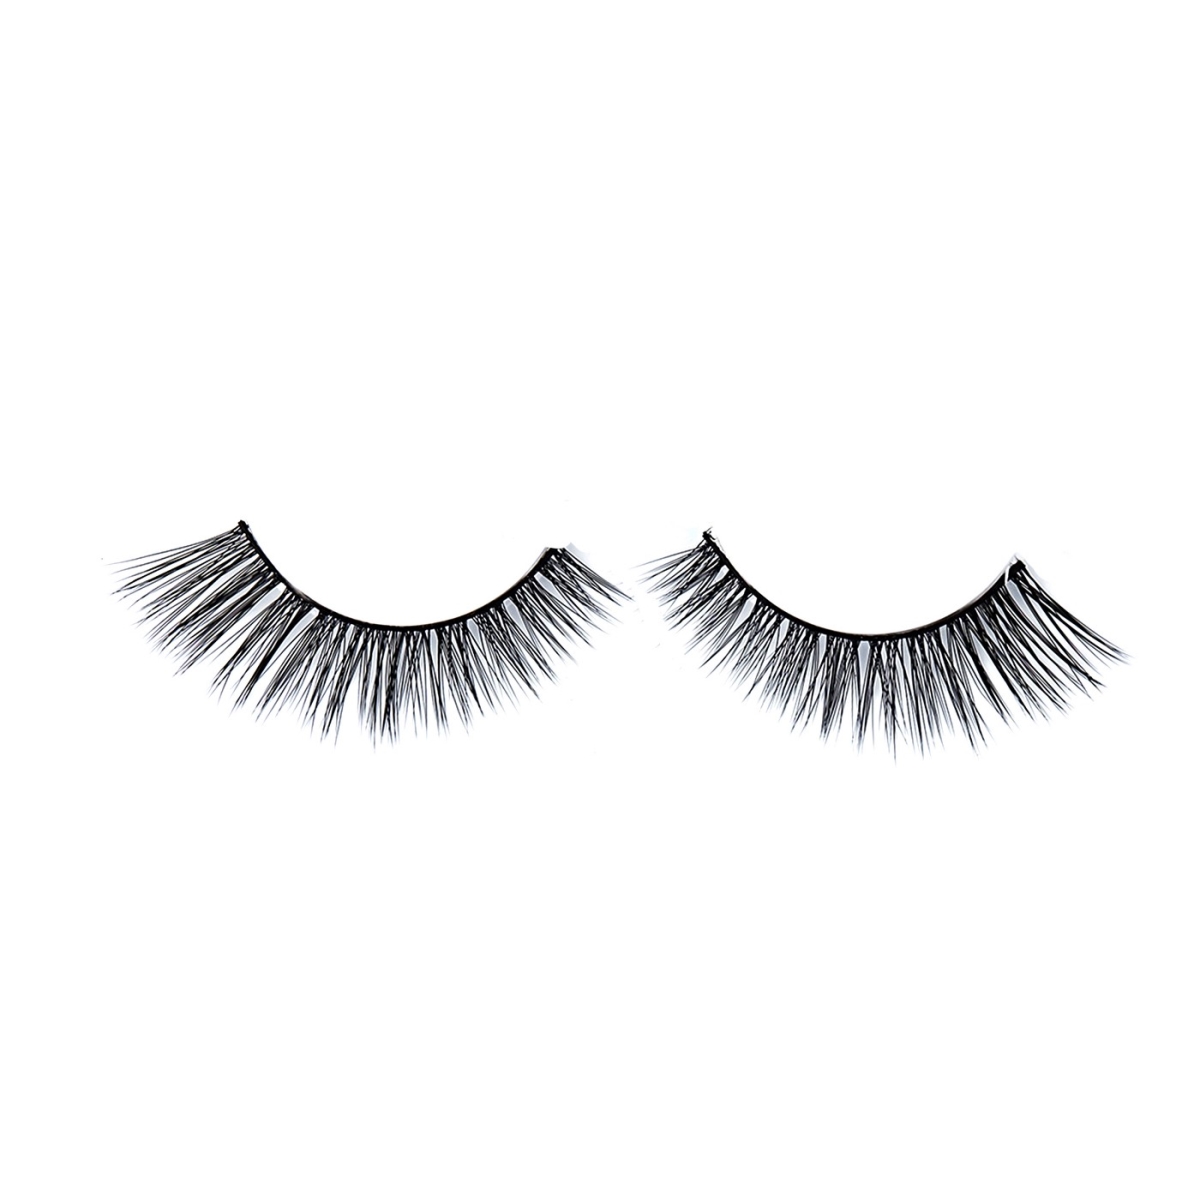 7984855 Winged & Polished Luxe Lash Kit, Black 85084 - Pack Of 4